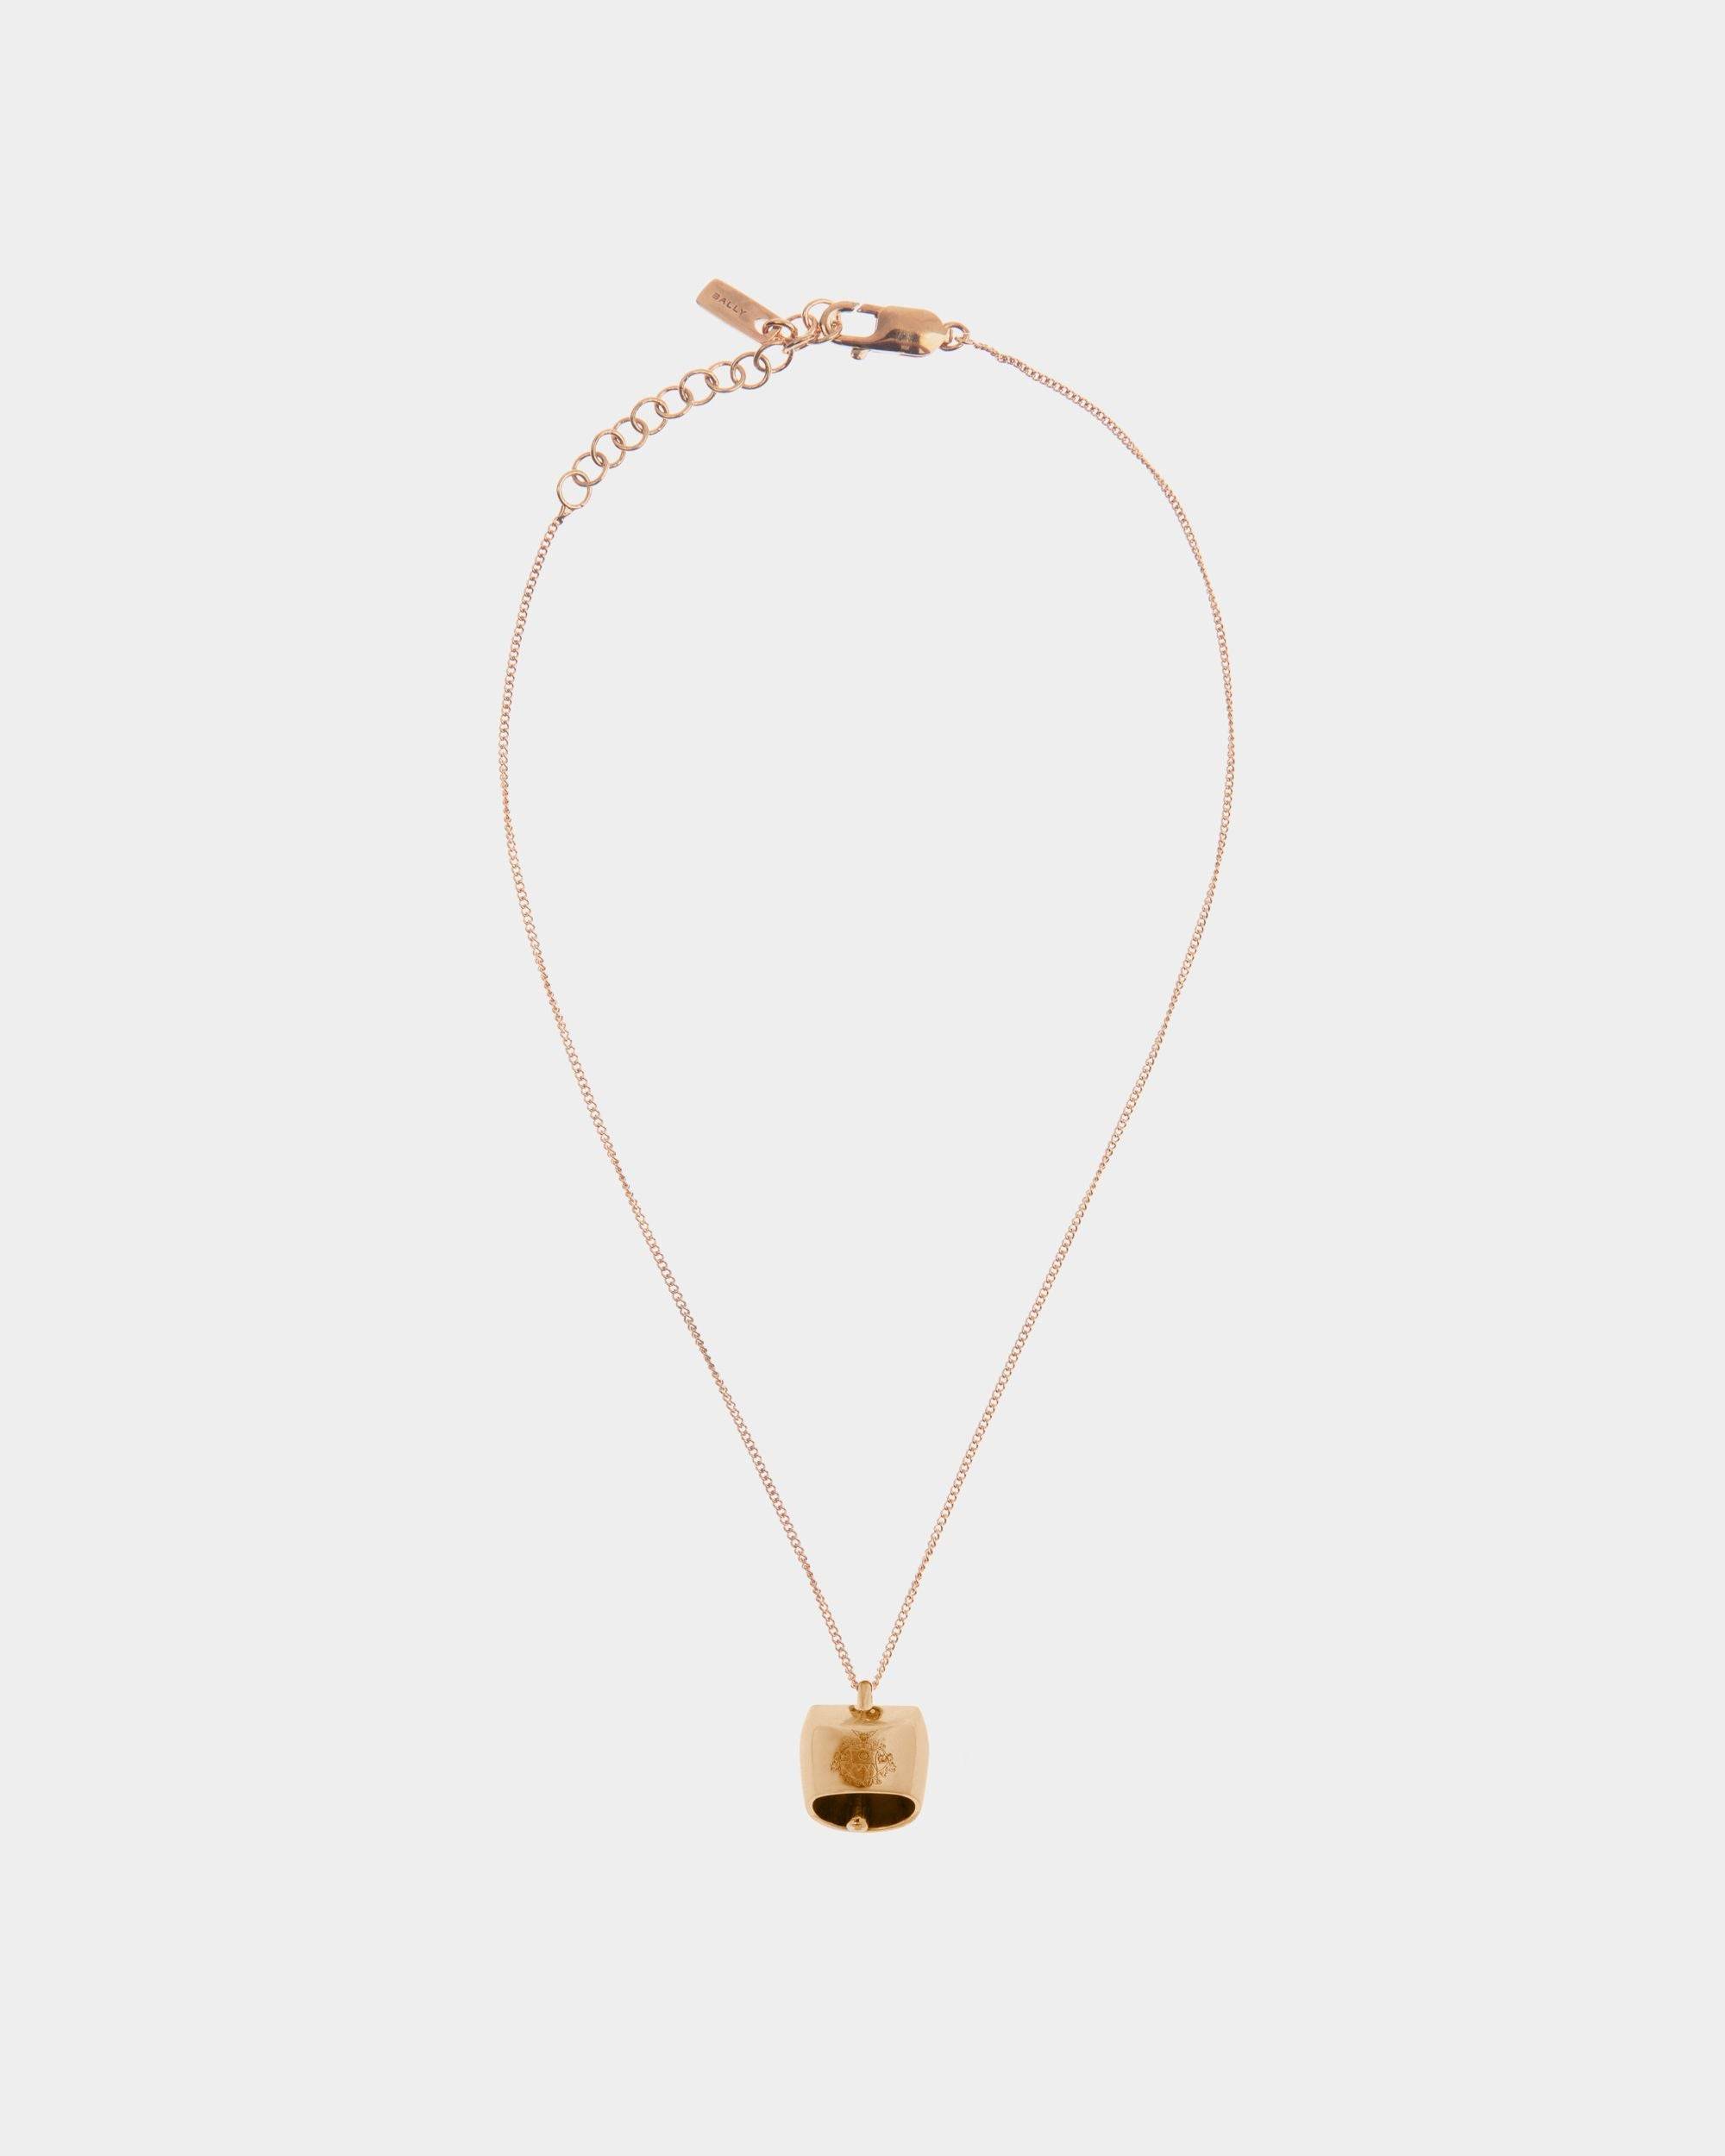 Belle | Women's Necklace in Gold Eco Brass | Bally | Still Life Front